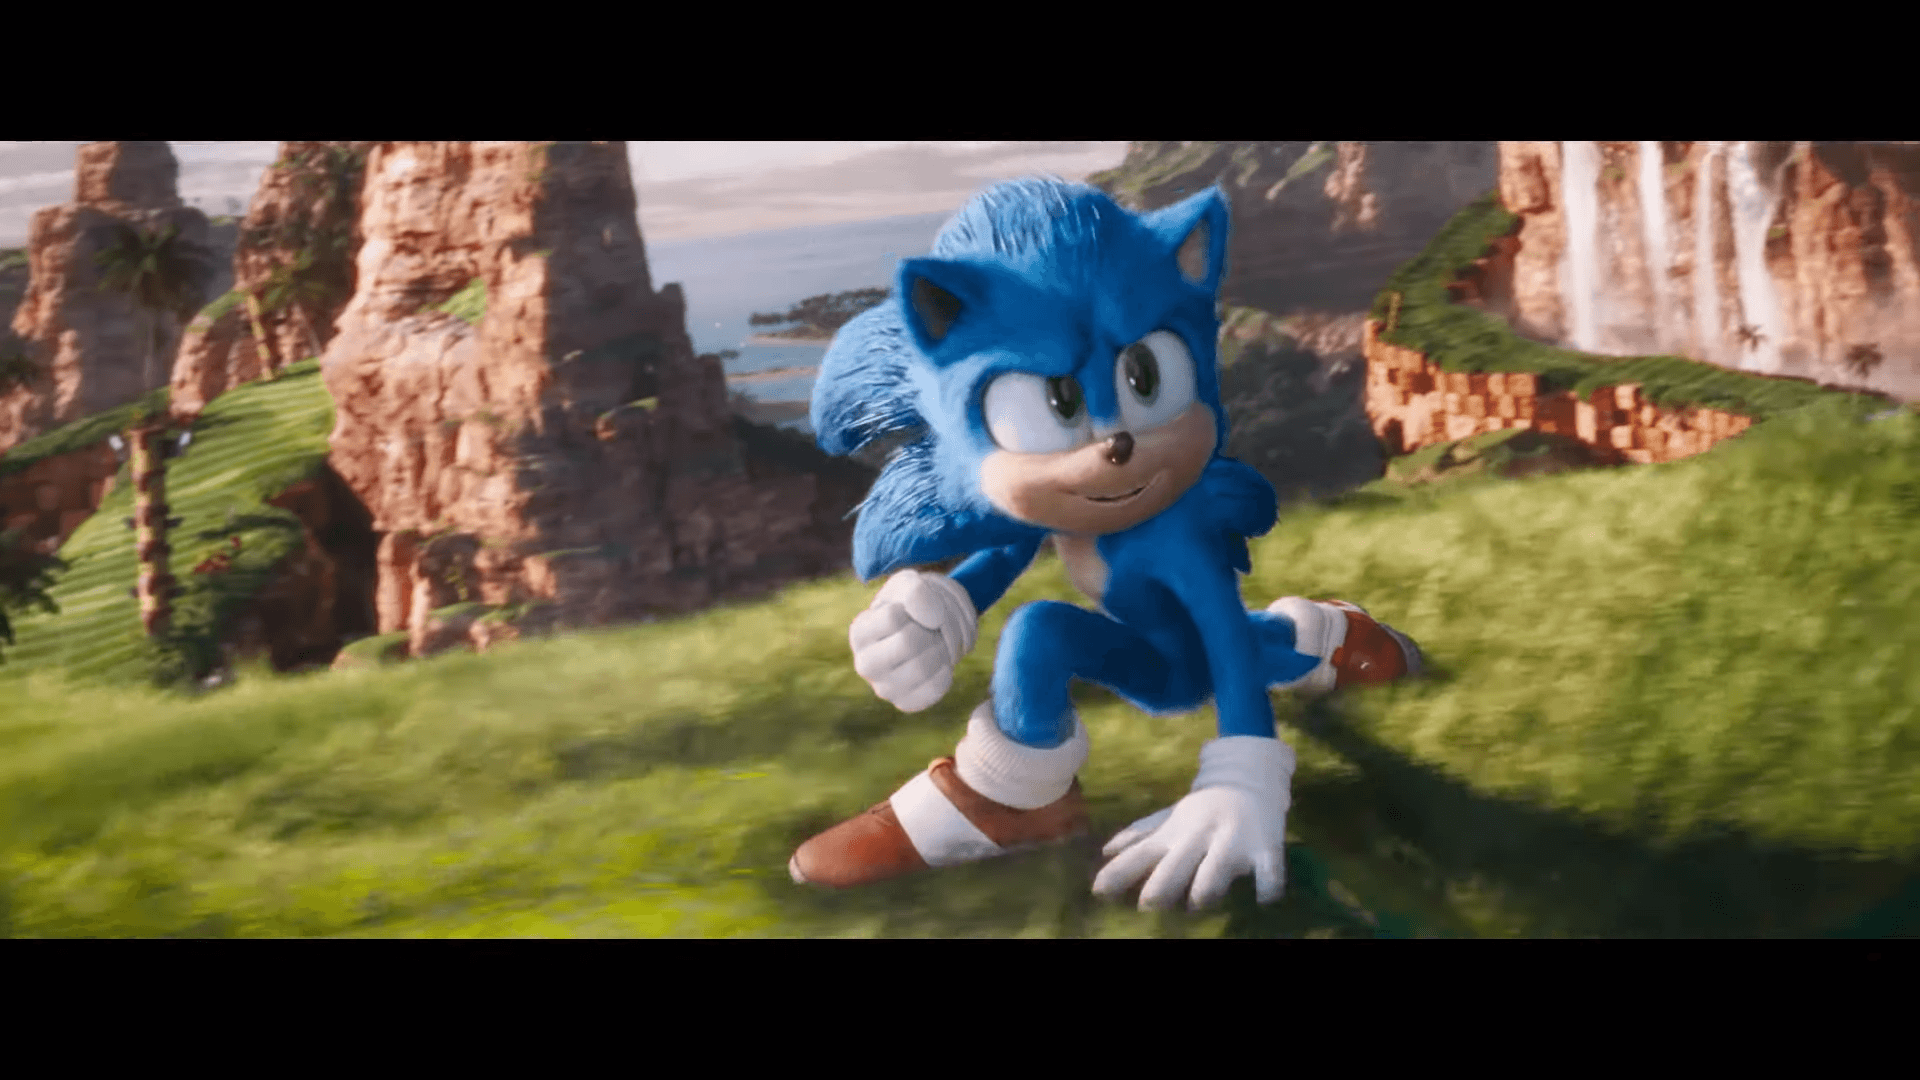 Sonic the Hedgehog Movie Shows Redesign in Brand New Trailer